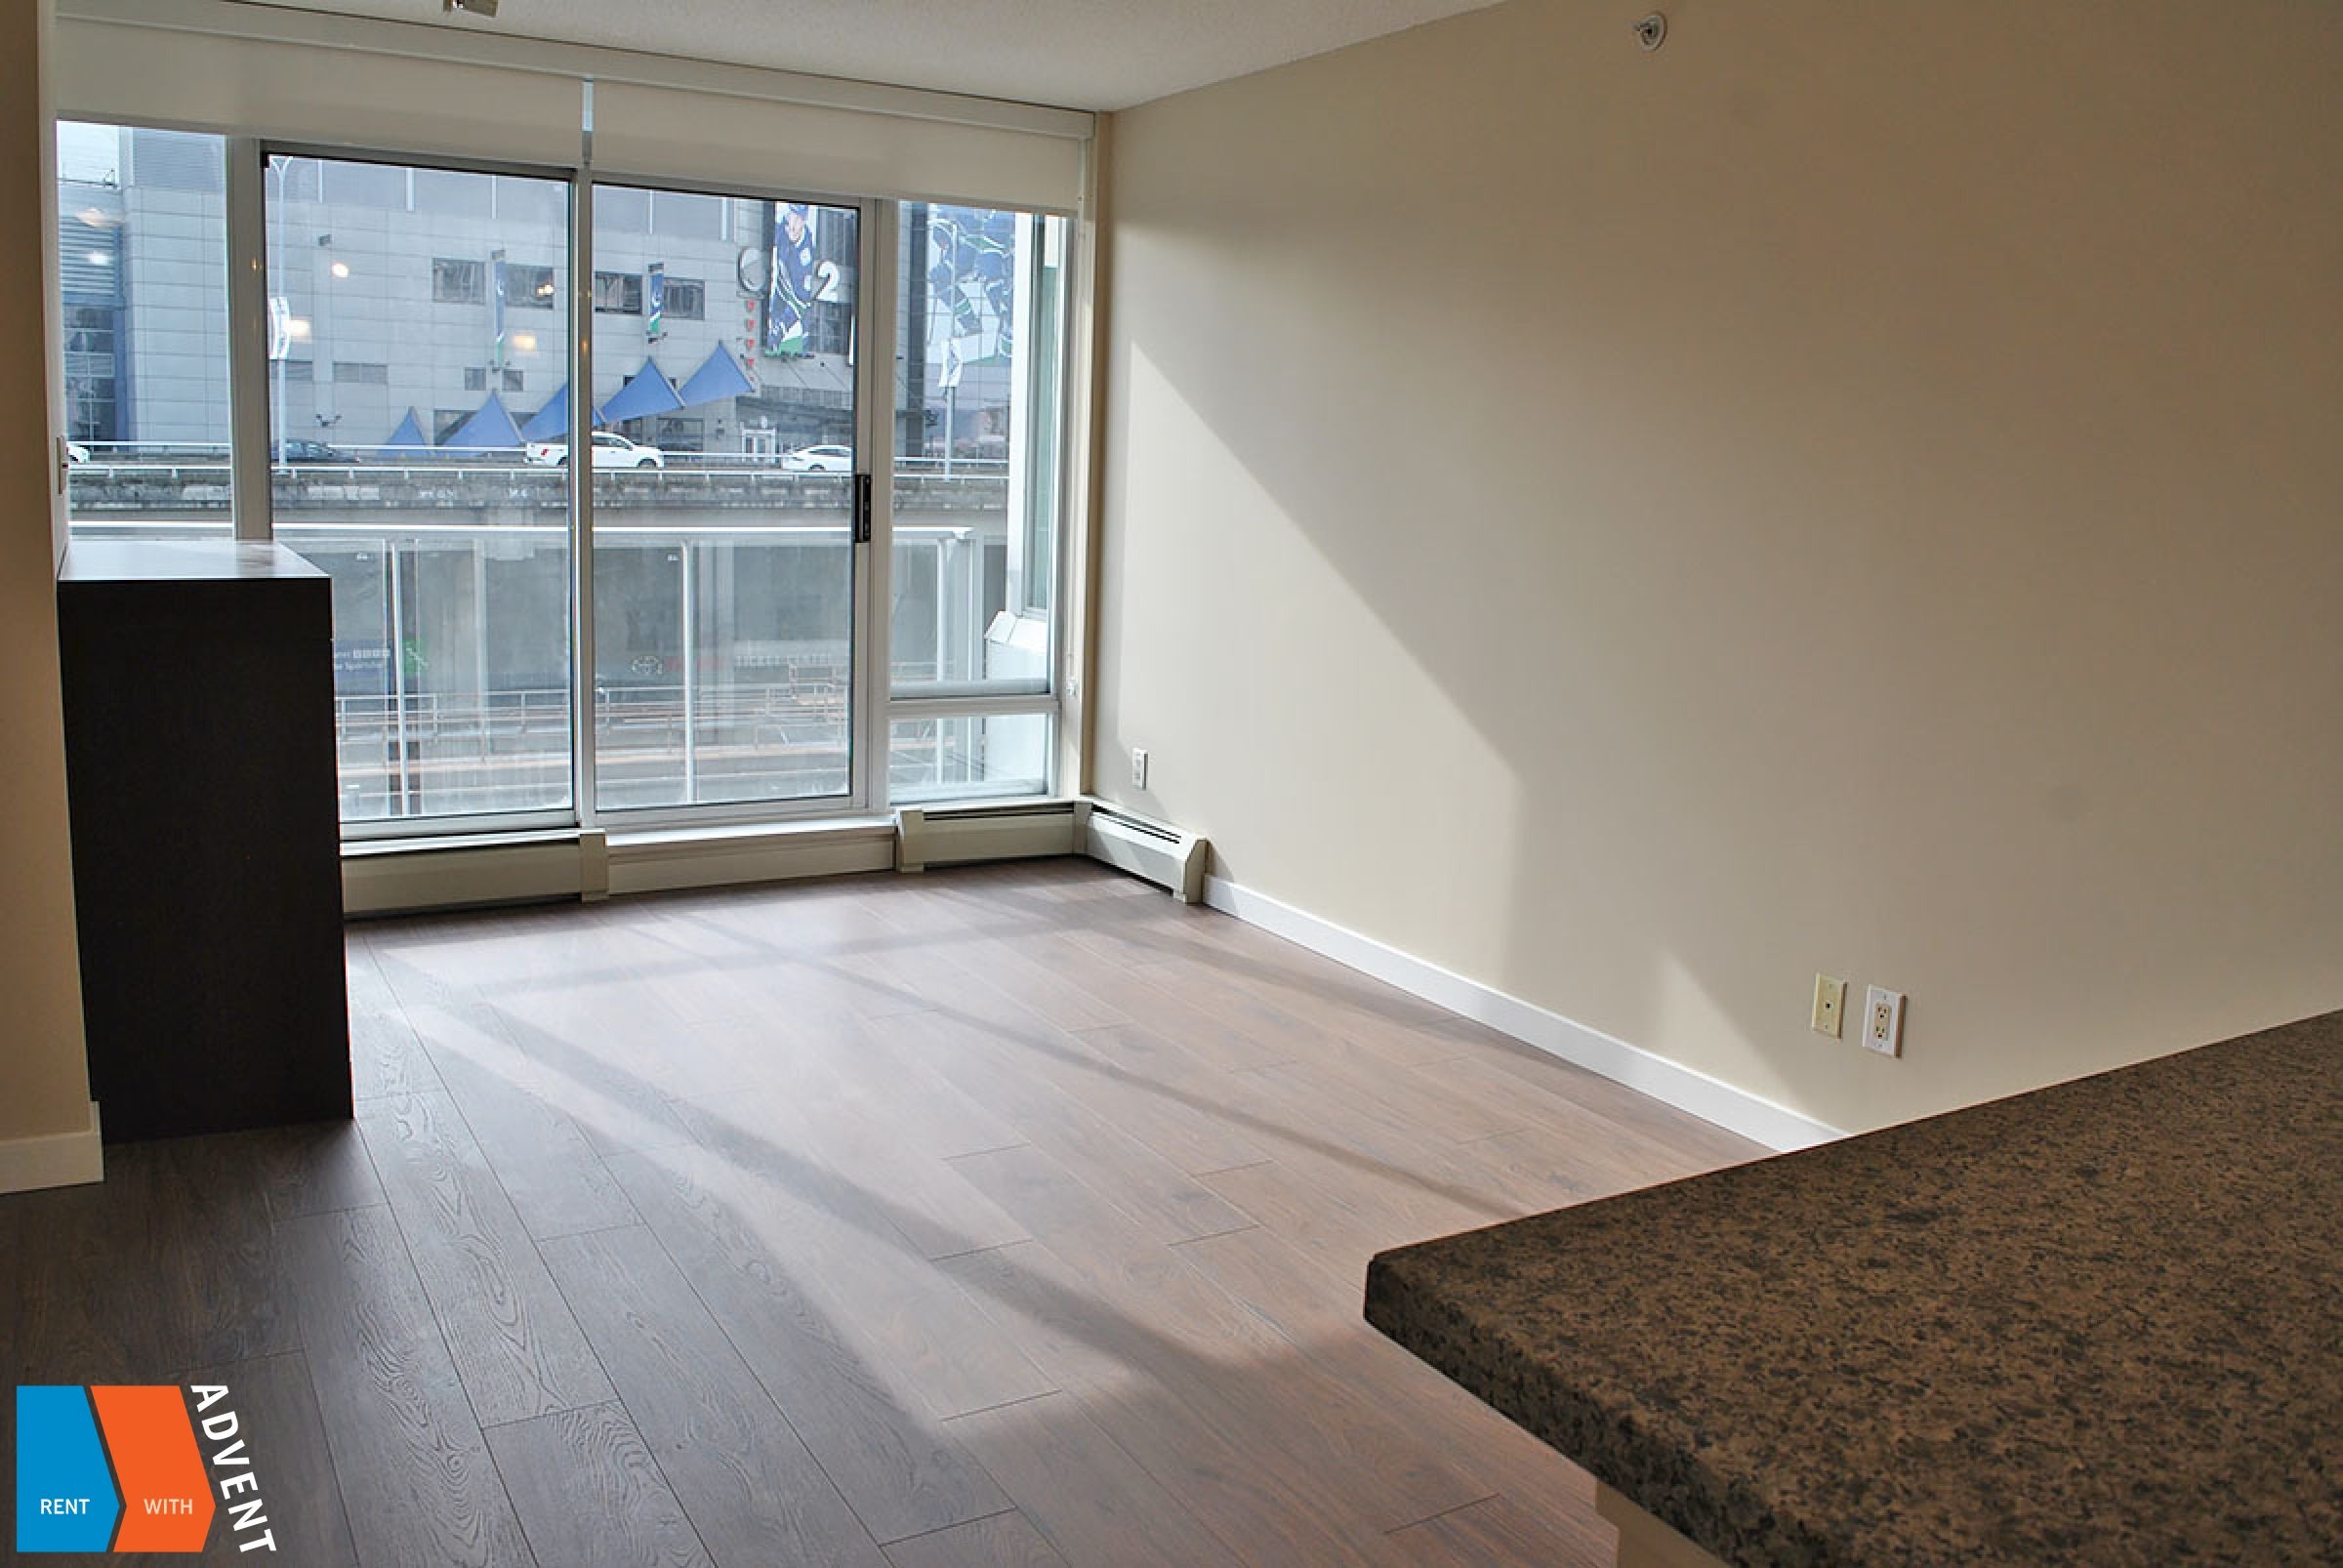 6th Floor Unfurnished 1 Bedroom & Flex Apartment Rental at Firenze in Downtown Vancouver. 603 - 688 Abbott Street, Vancouver, BC, Canada.